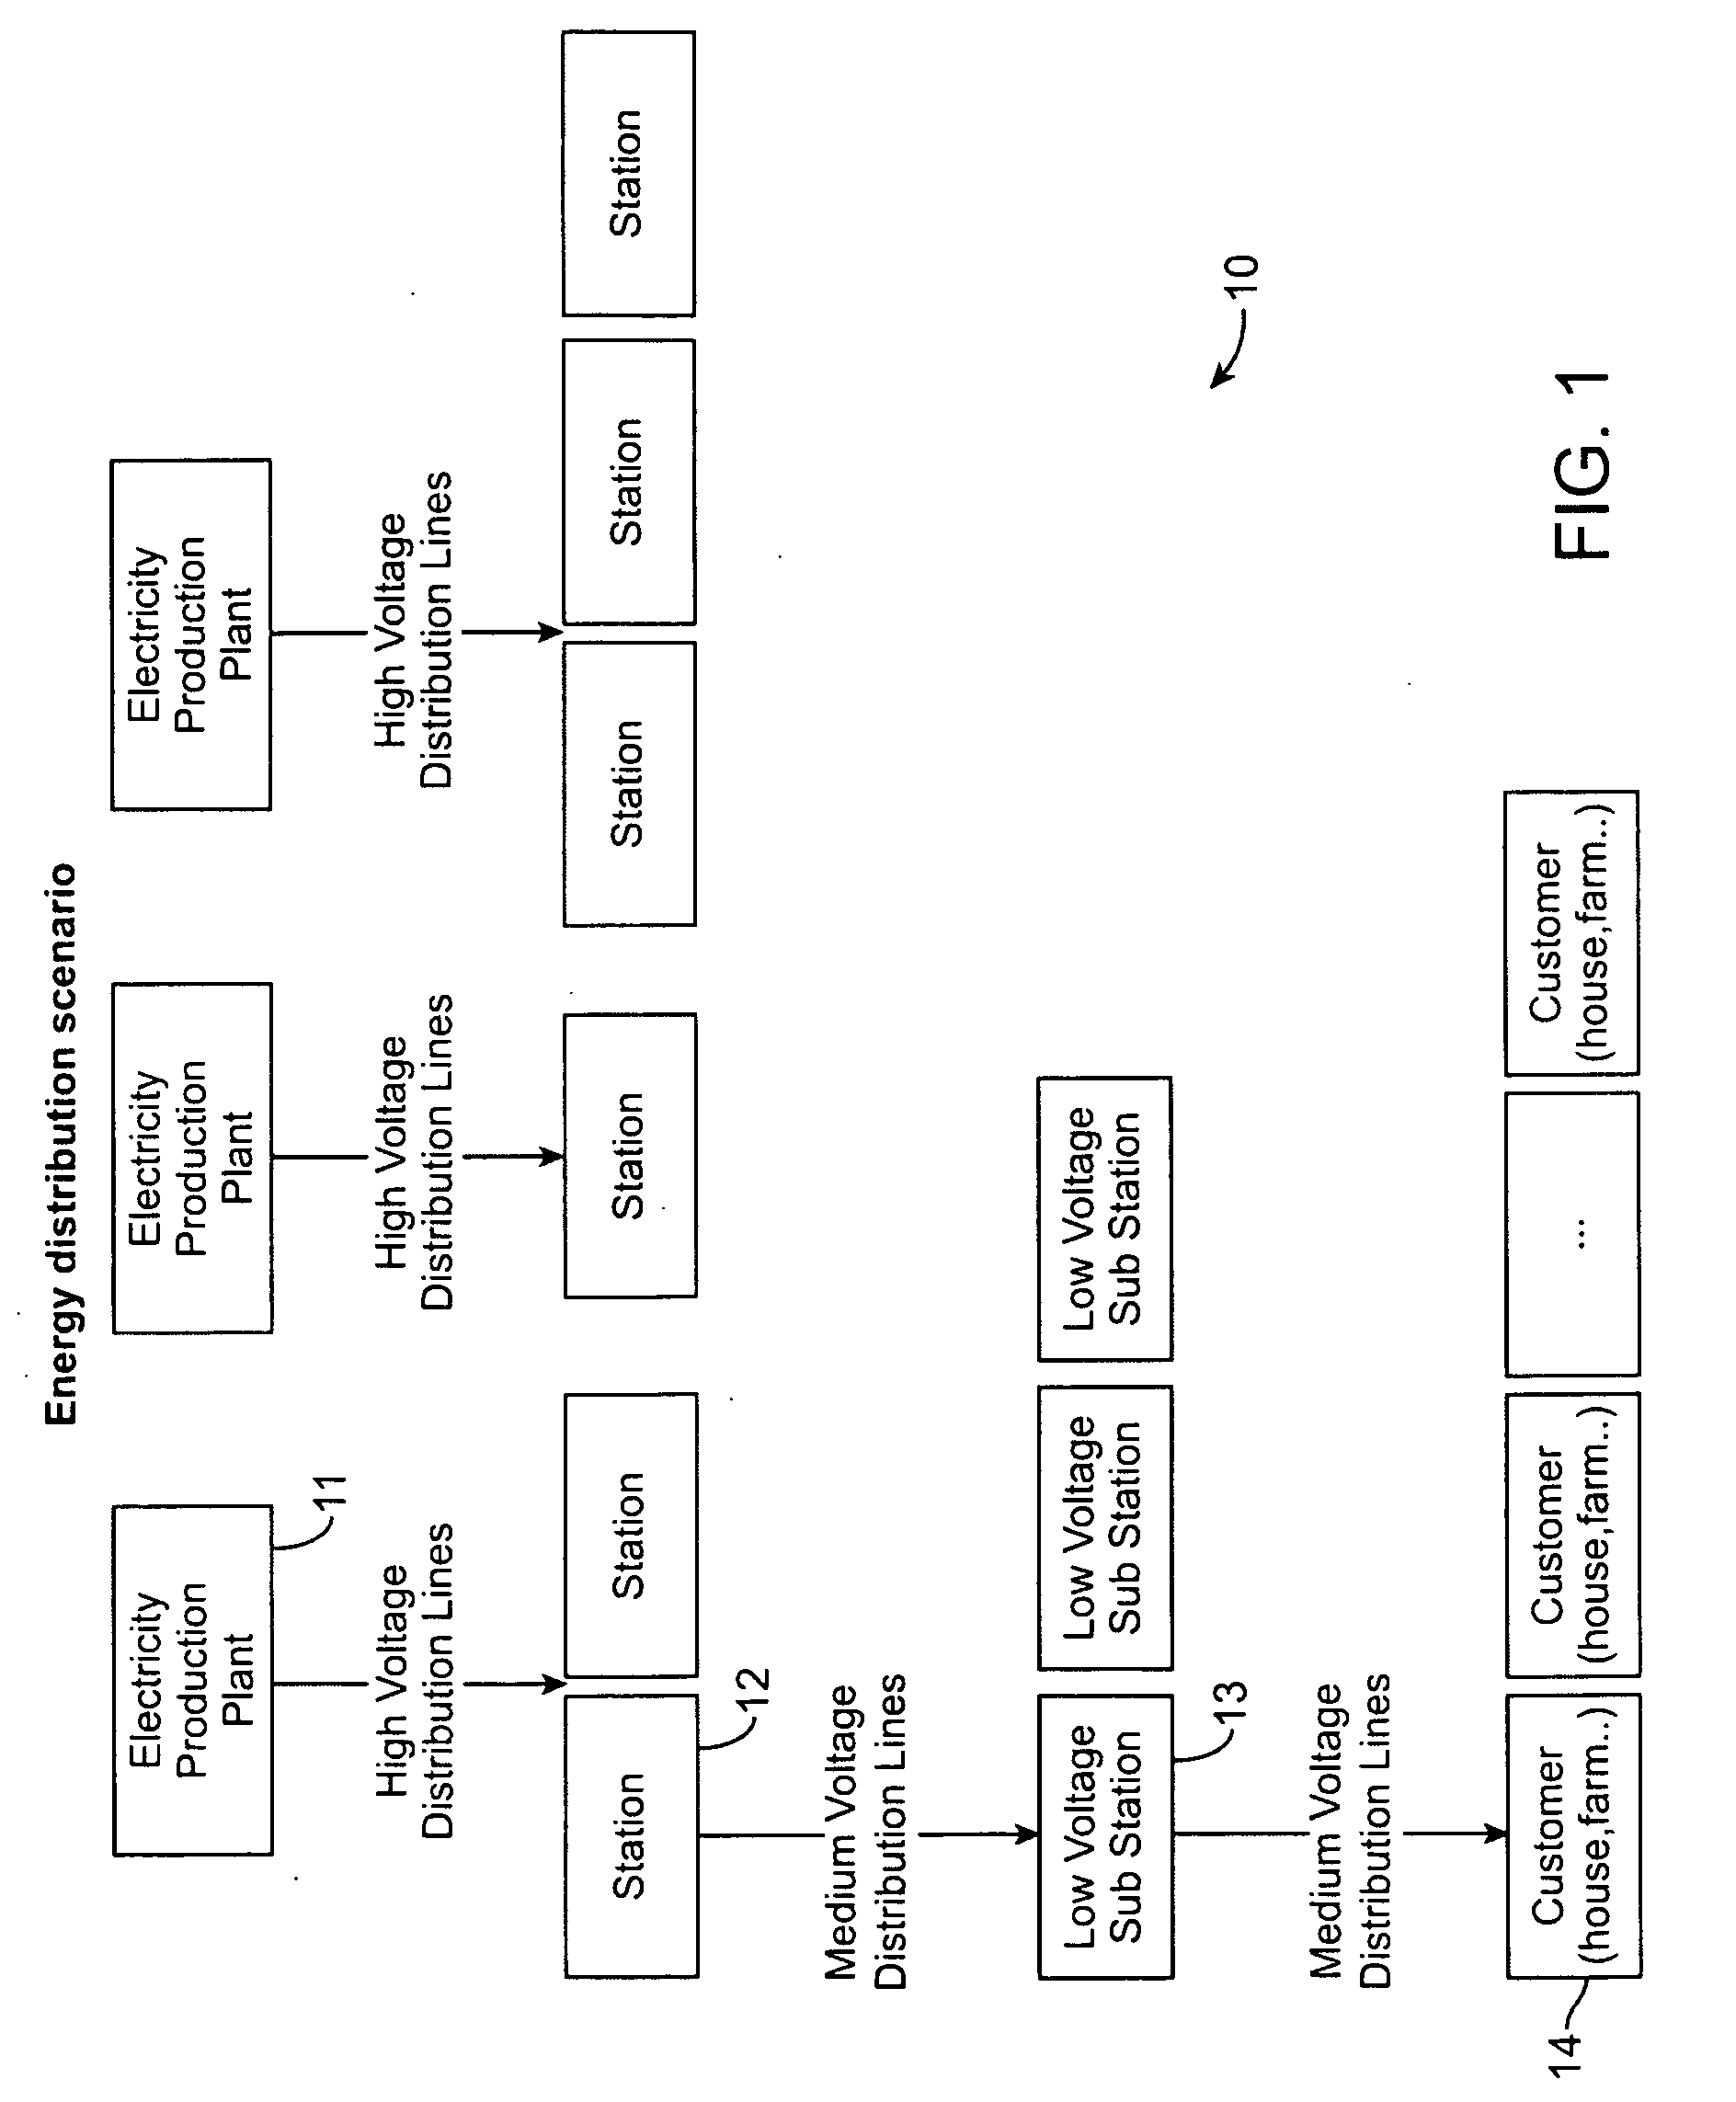 Method and system for electricity consumption profile management for consumer devices